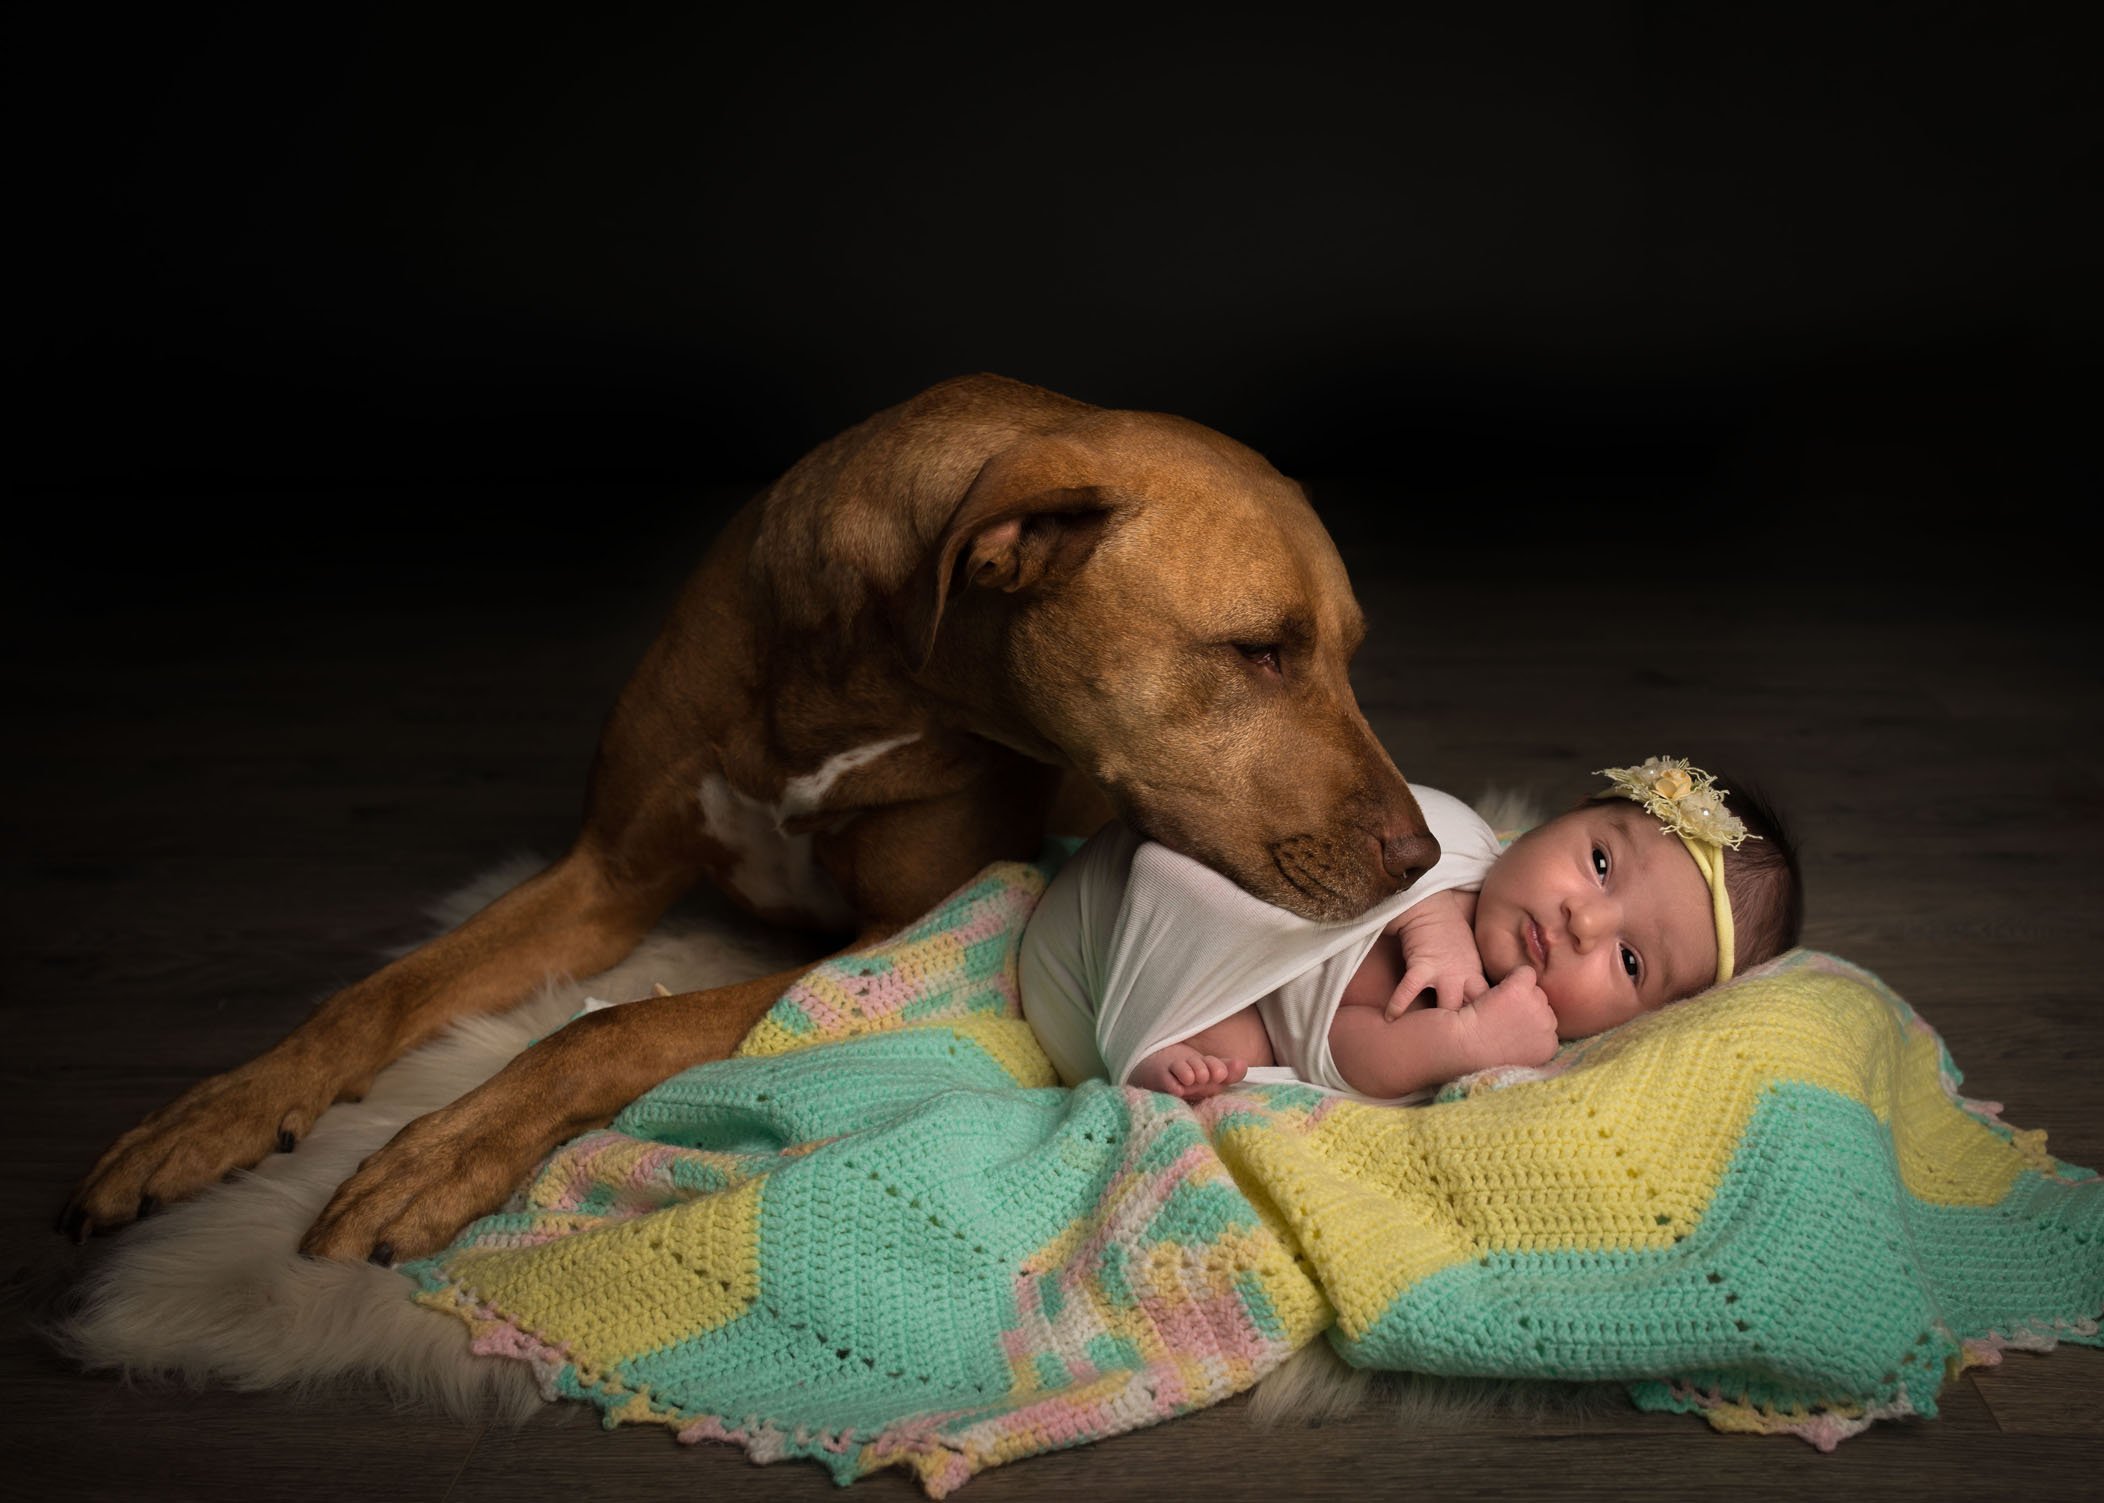 newborn lying on family blanket with dog watching over her